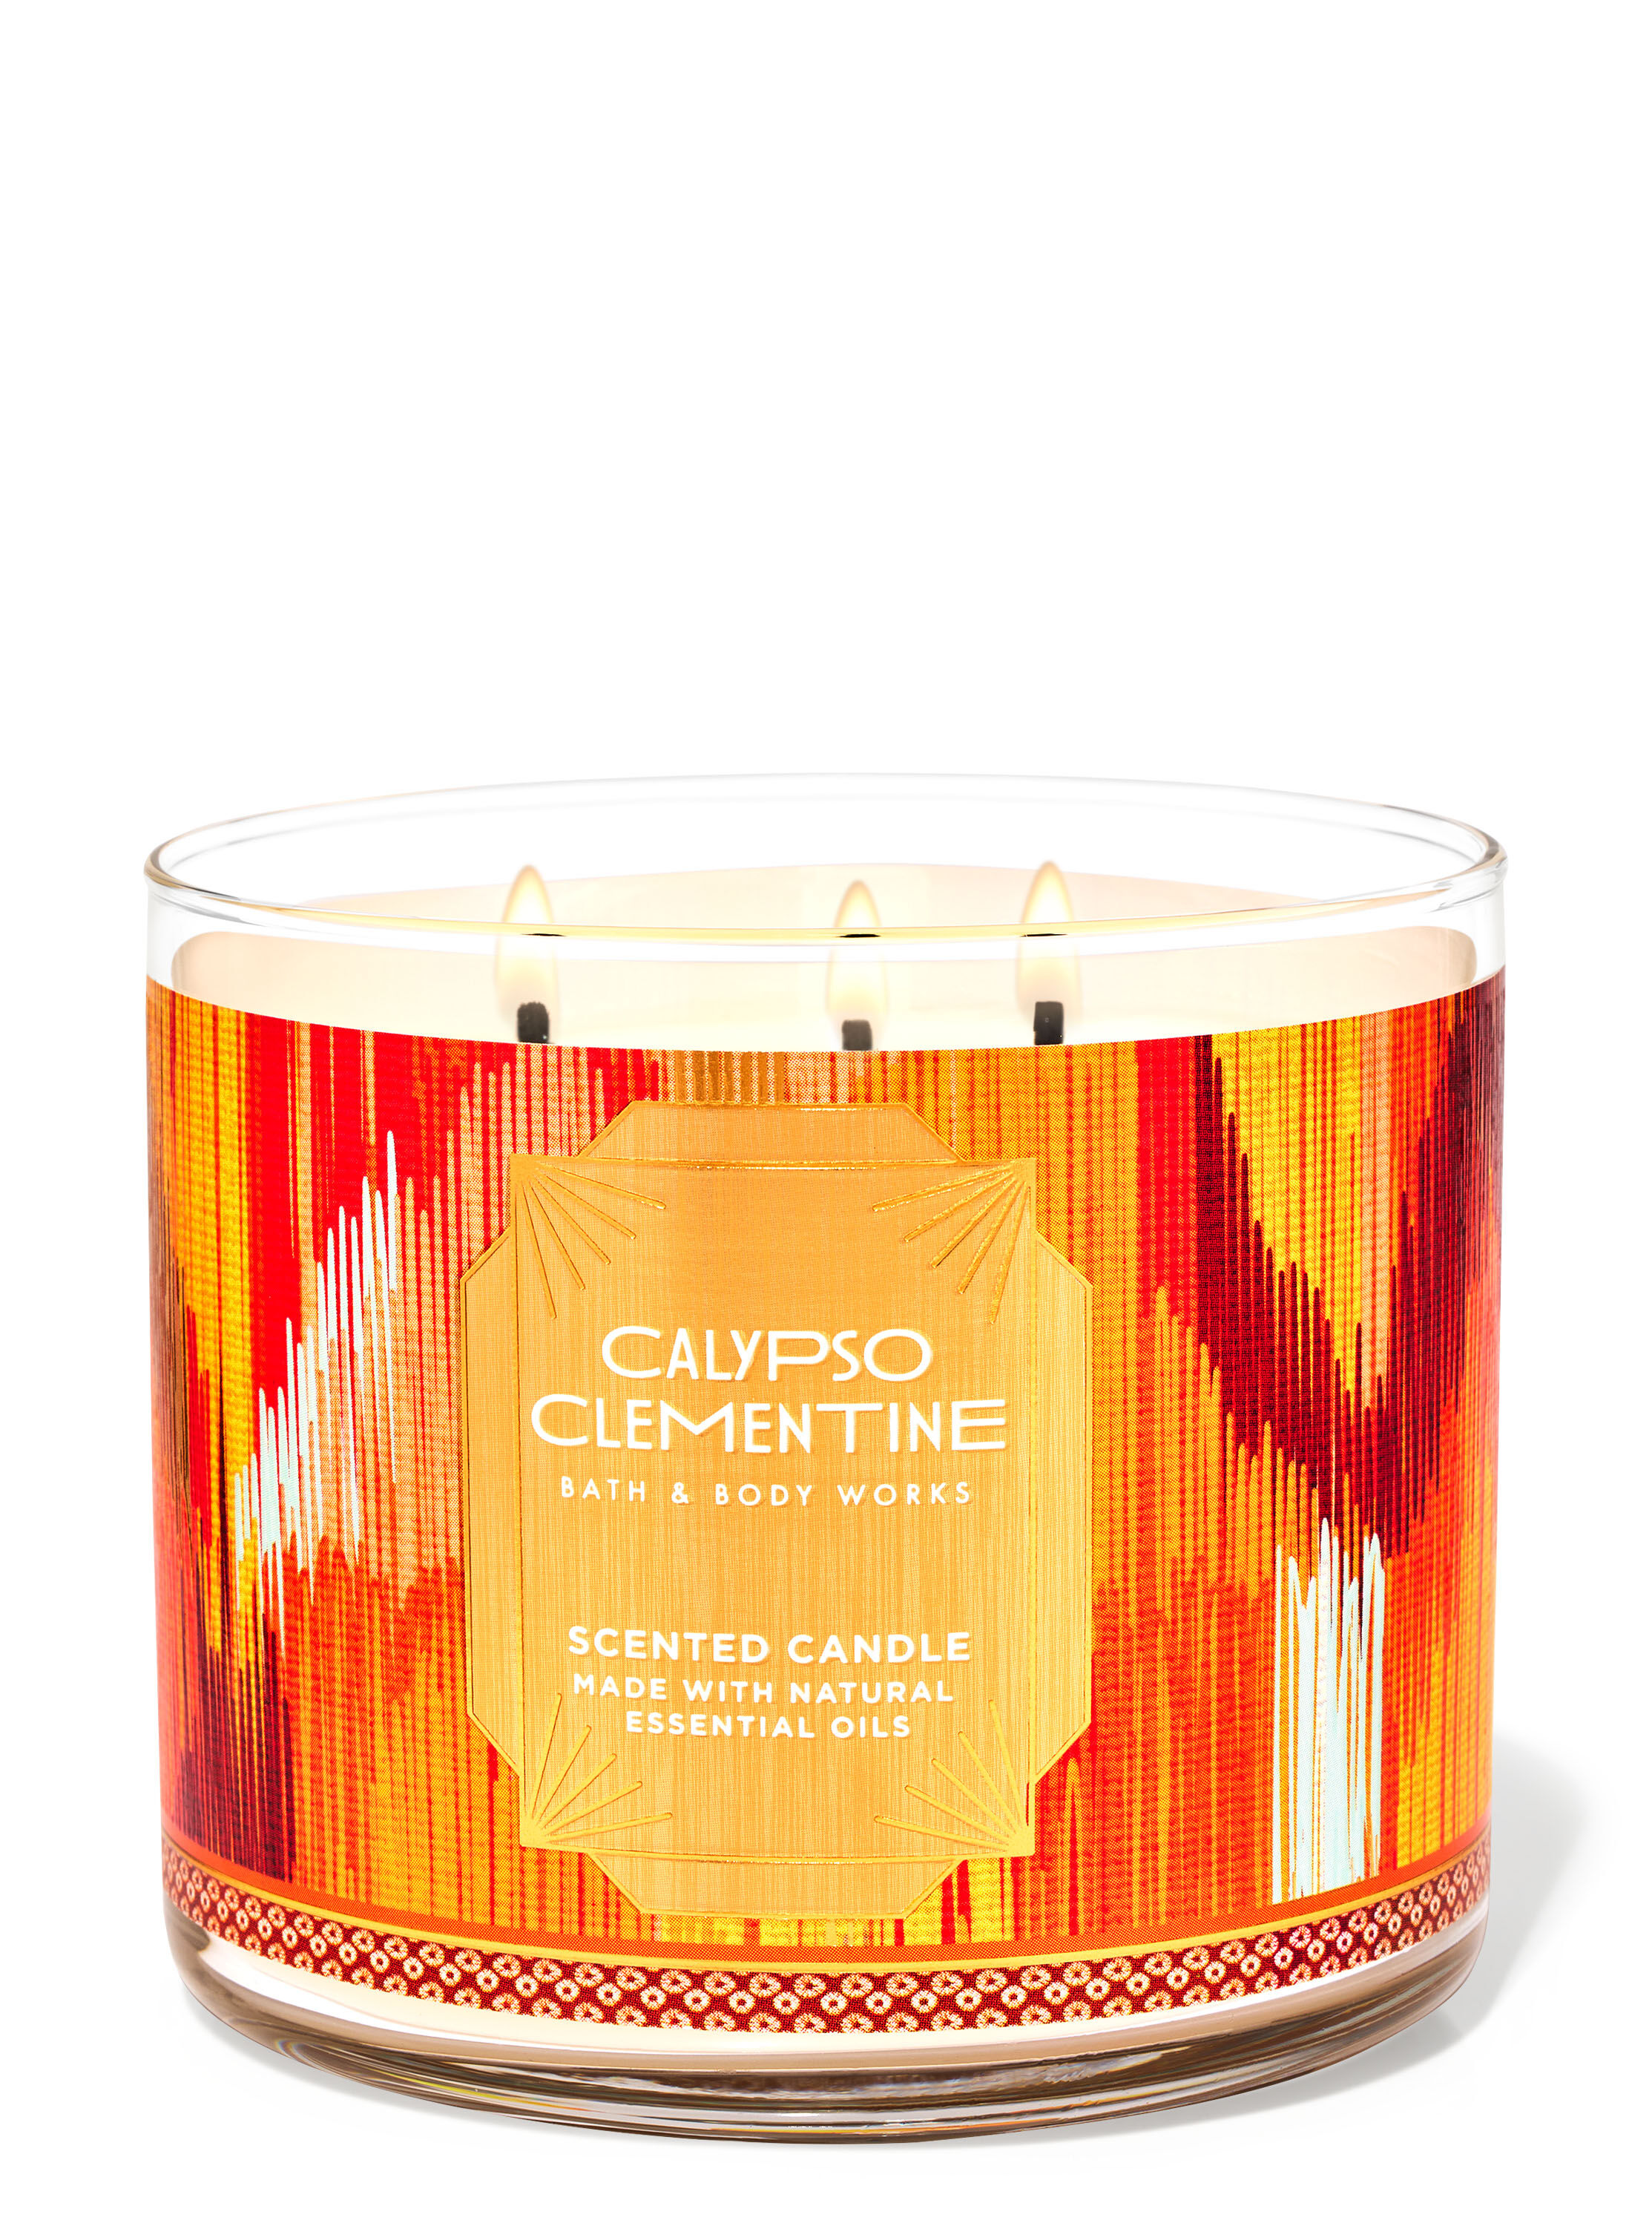 Calypso Clementine 3-Wick Candle